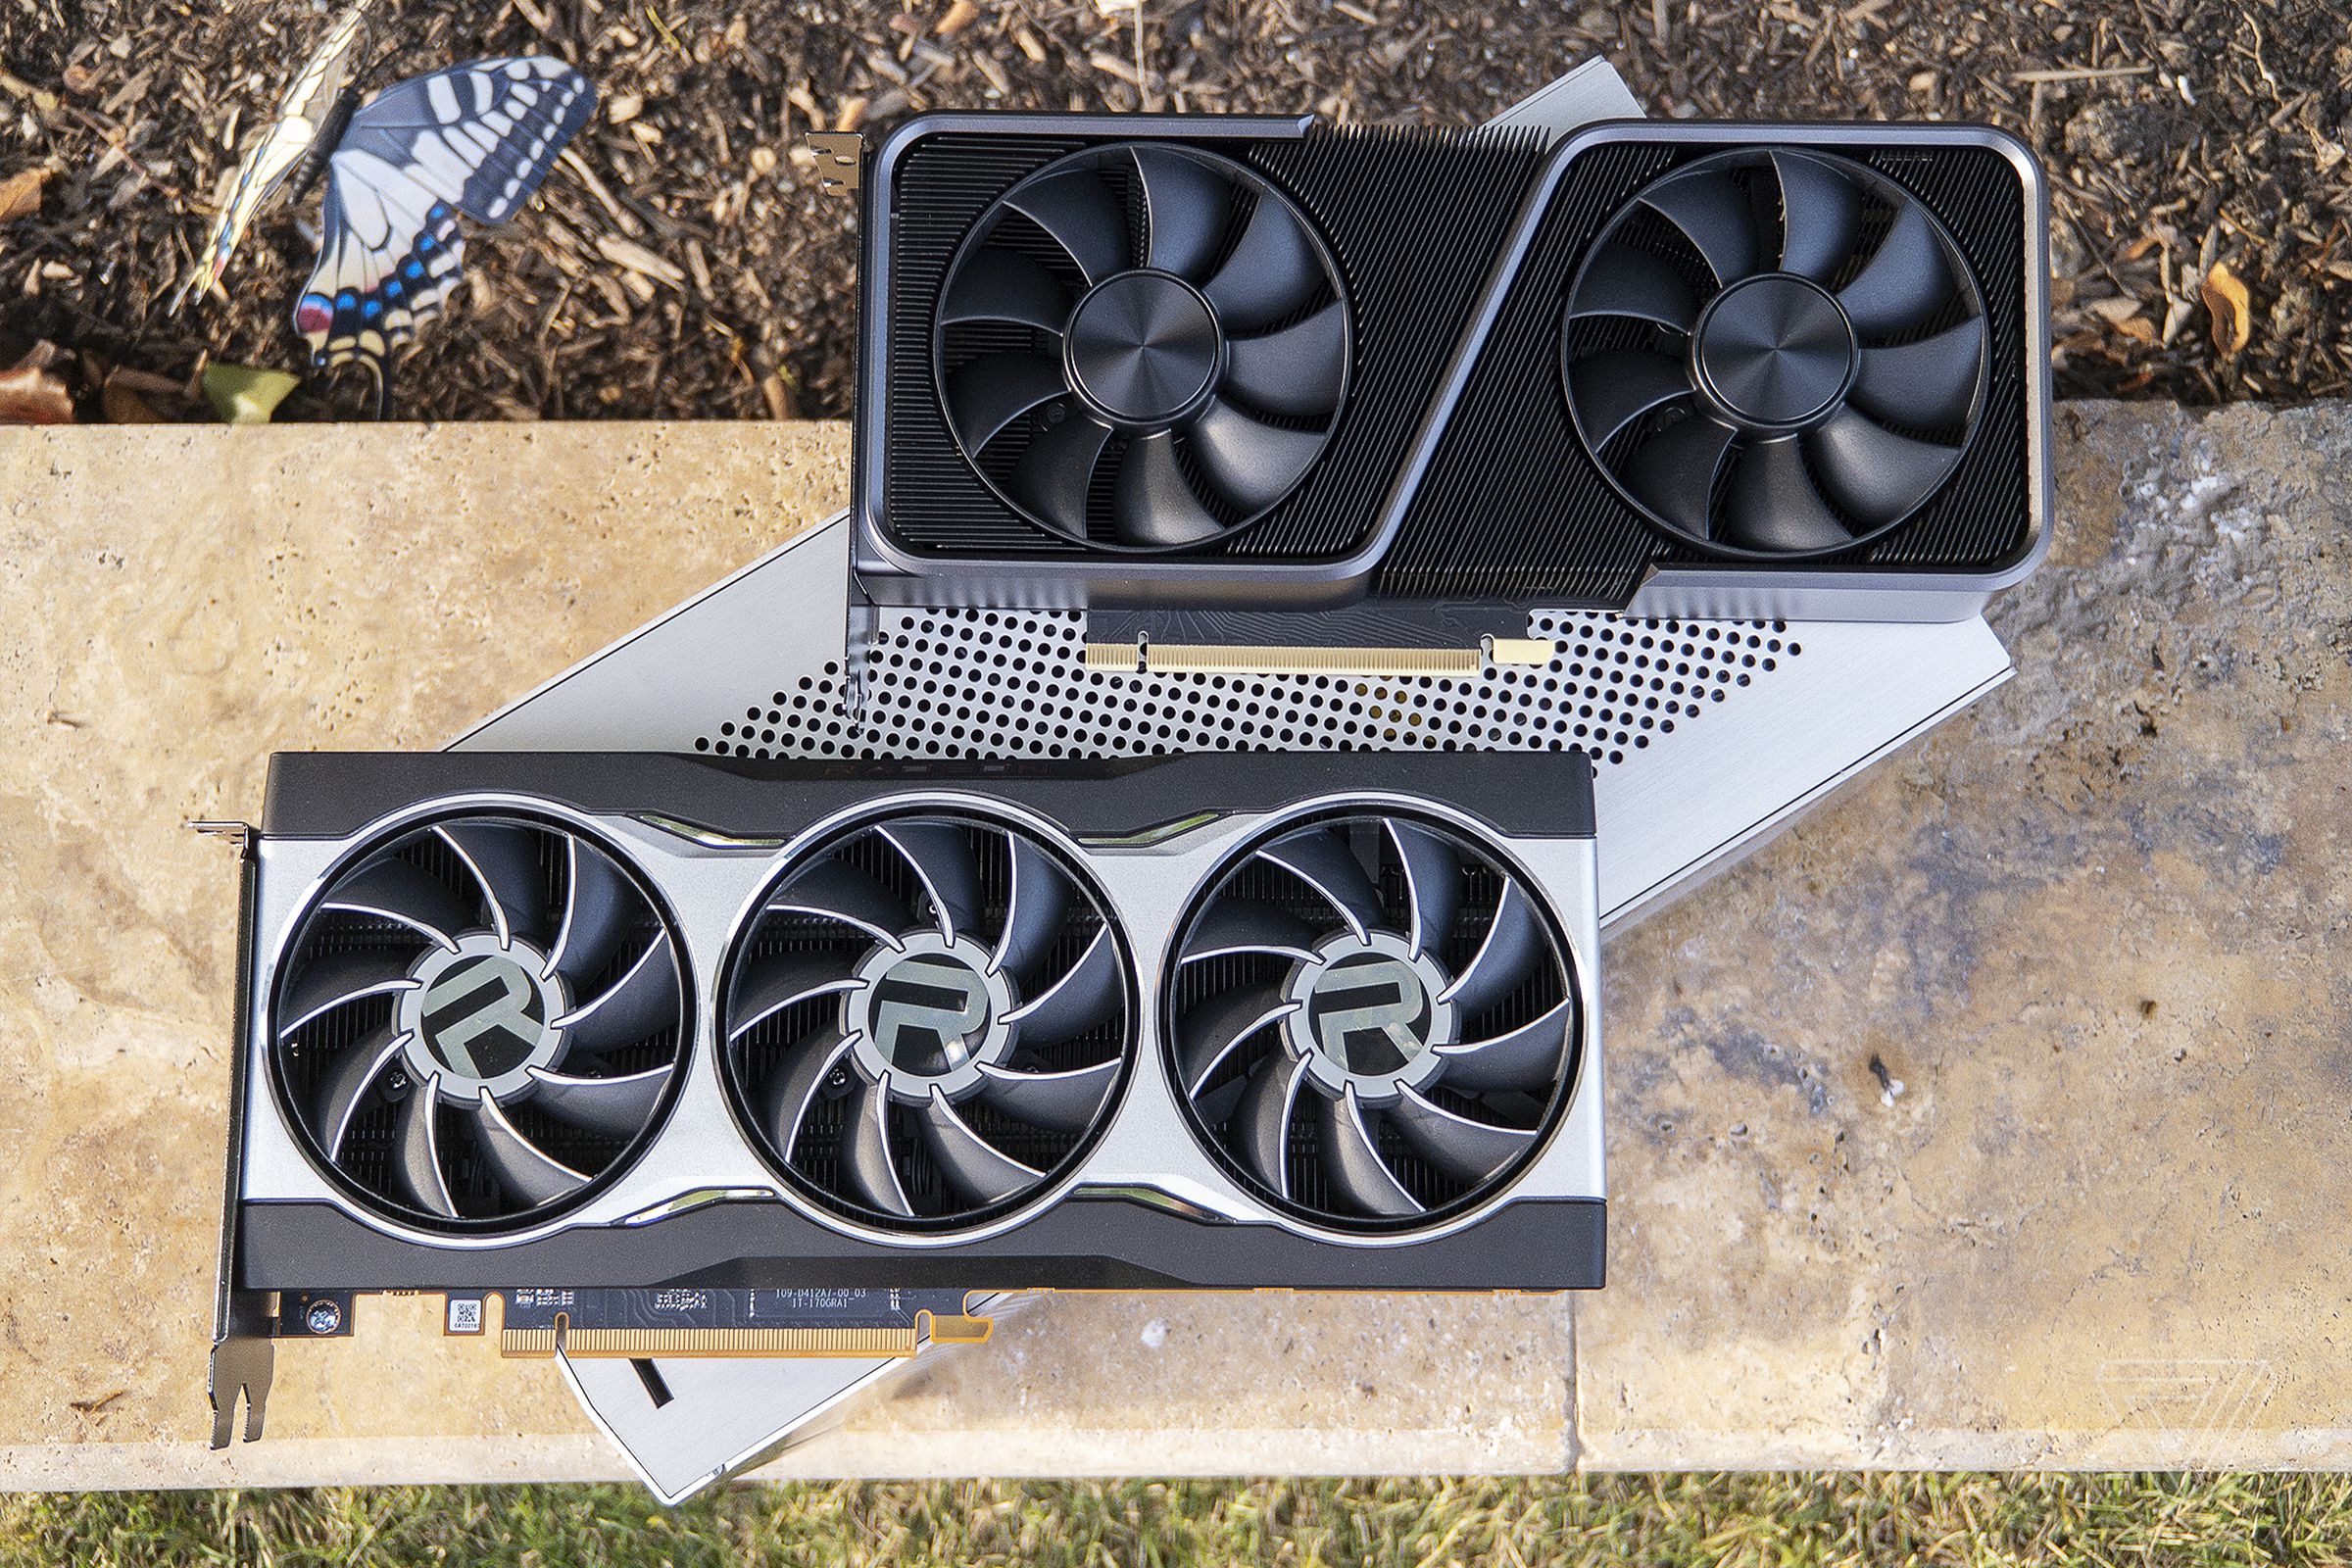 The $499 Nvidia GeForce RTX 3070 and $579 AMD Radeon RX 6800 are still selling well above MSRP.